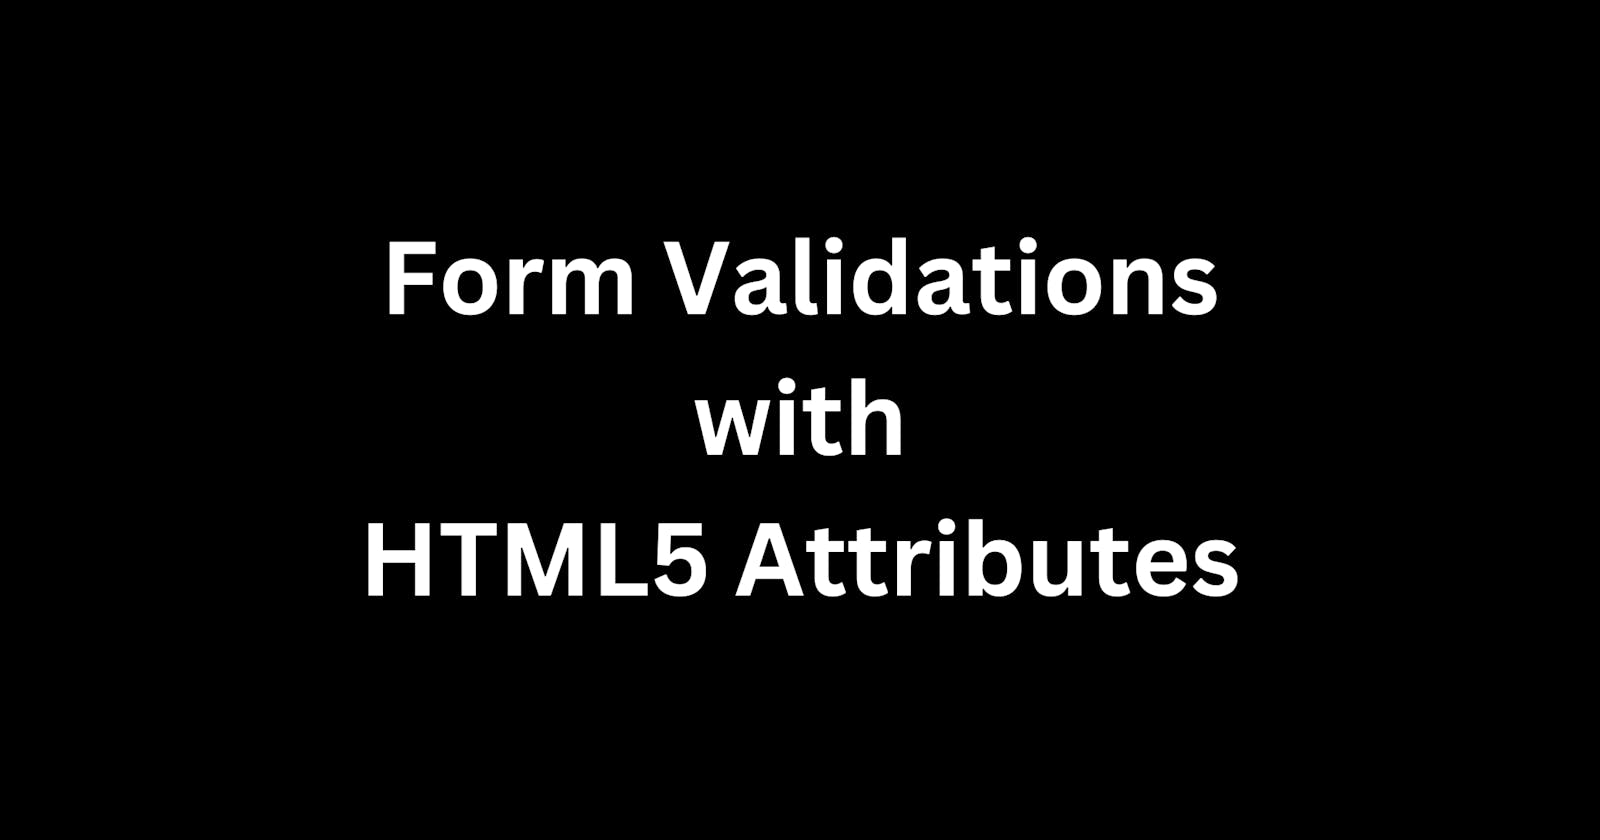 Client-Side Form Validations with HTML and JavaScript: Part 1